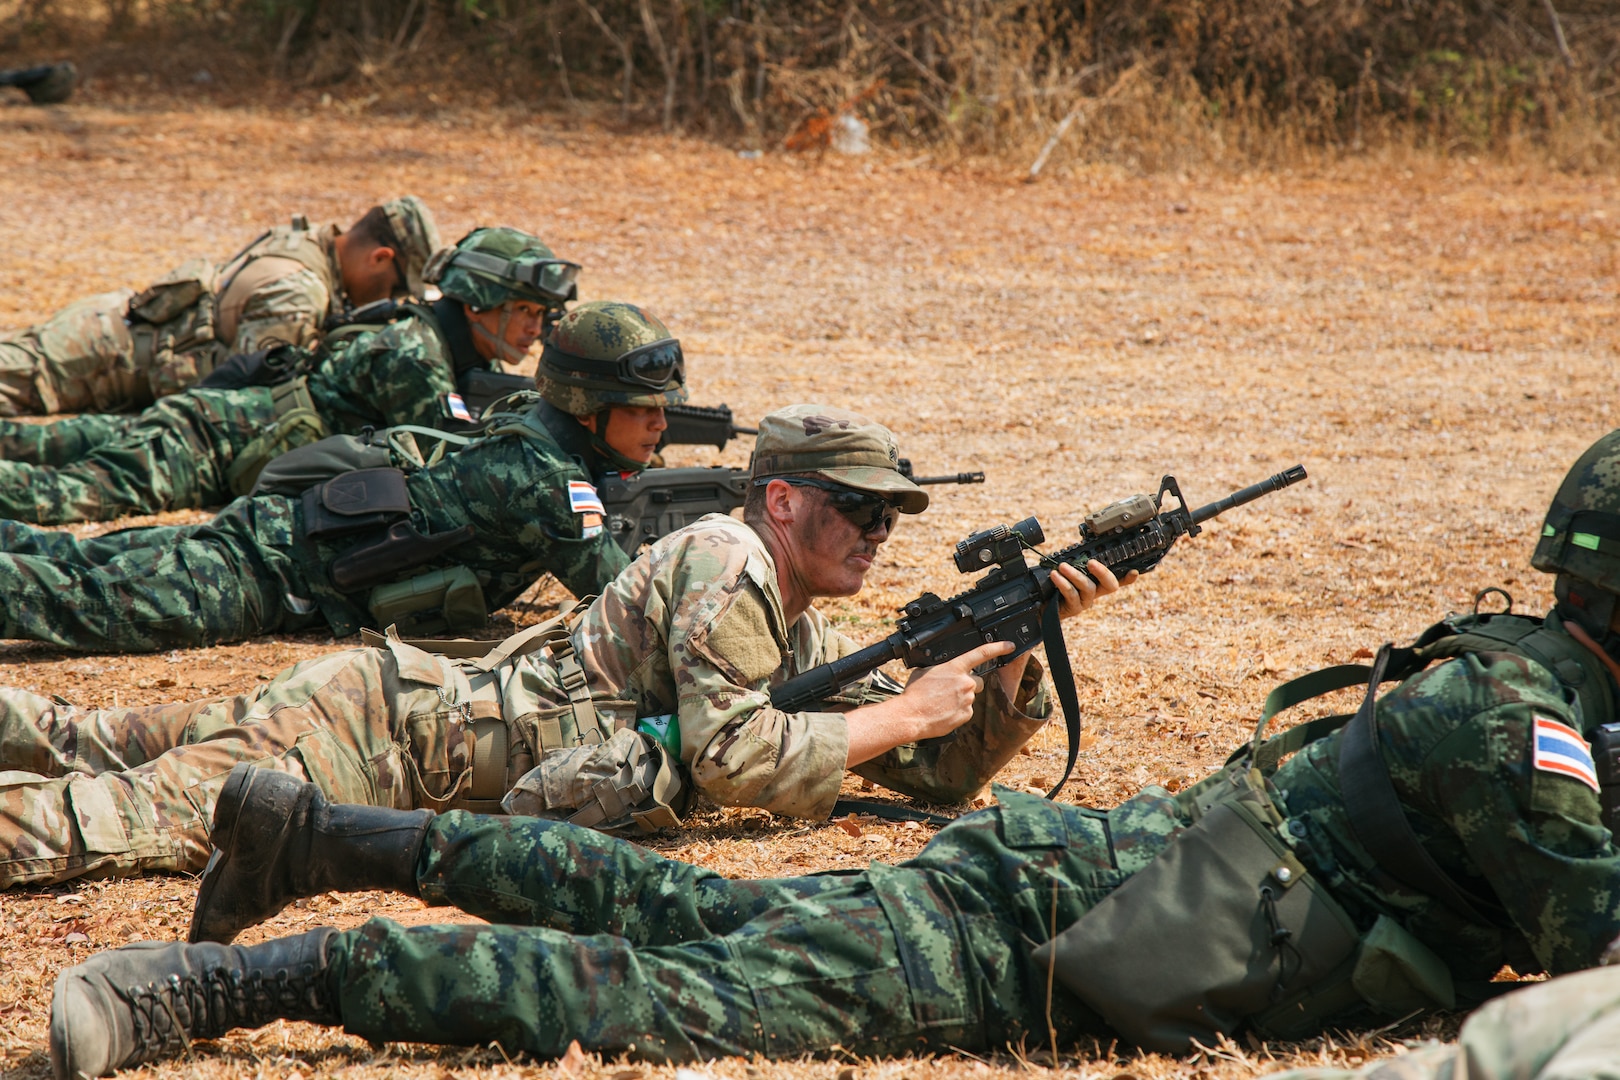 U.S. Army soldiers assigned to Chosin Company, 1st Battalion, 17th Infantry Regiment, 2nd Stryker Brigade Combat Team, 7th Infantry Division, and members of the 1st Company, 1st Battalion, 2nd Infantry Regiment Royal Thai Army conduct squad movement techniques at a small arms range during Exercise Cobra Gold 24, Feb. 29, 2024, in Sa Kaeo Province, Thailand. The multilateral exercise strengthens regional relationships and enhances interoperability among Allies and partners through shared experiences and rigorous training.  (U.S. Army photo by Staff Sgt. Effie Mahugh, 7th Infantry Division)